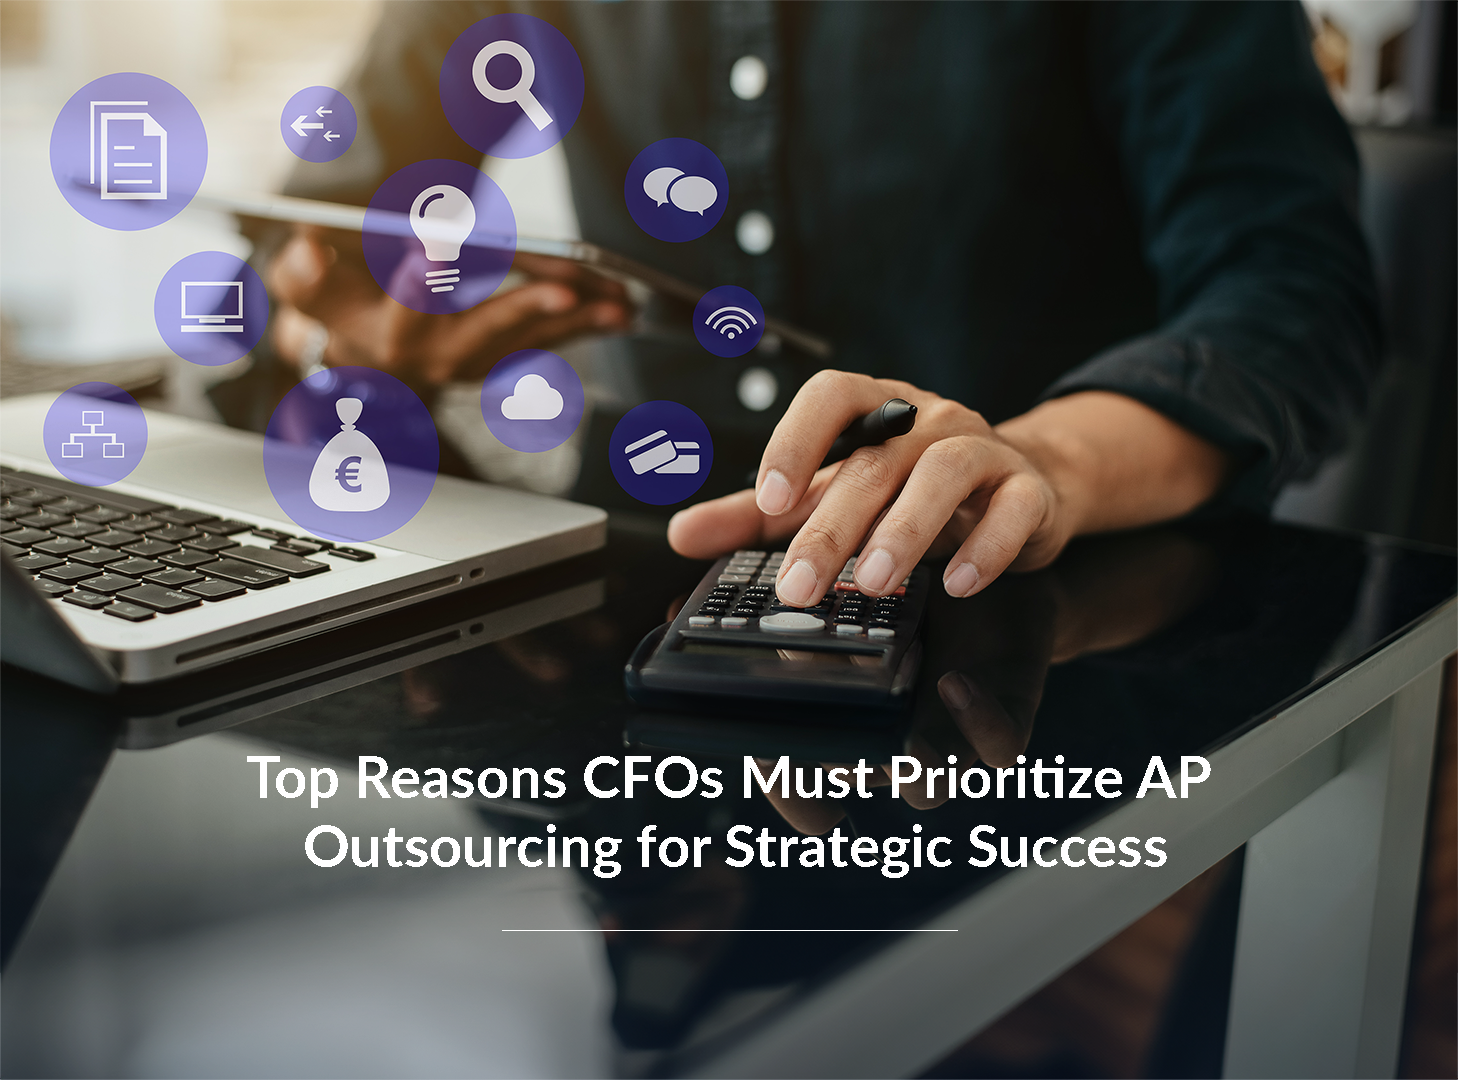 Top Reasons Why CFOs Must Prioritize AP Outsourcing for Strategic Success